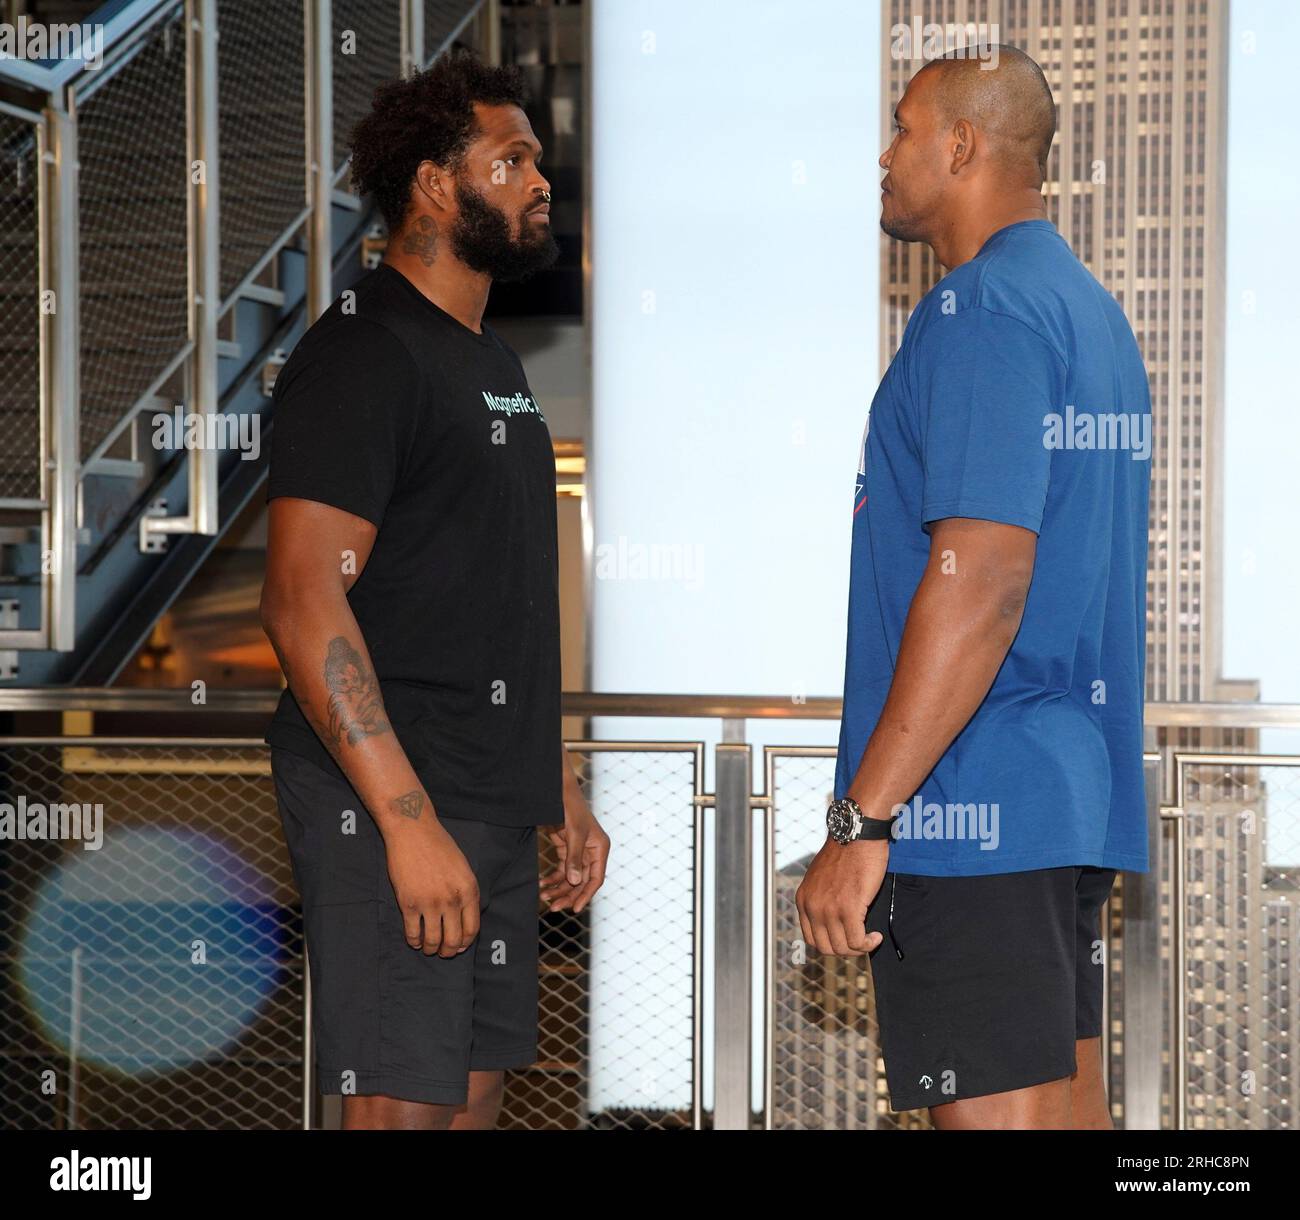 New York, NY, USA. 15th Aug, 2023. Maurice Greene, Renan Ferreira at a public appearance for PFL World Championship Semifinalists Visit Empire State Building, The Empire State Building, New York, NY August 15, 2023. Credit: Eli Winston/Everett Collection/Alamy Live News Stock Photo